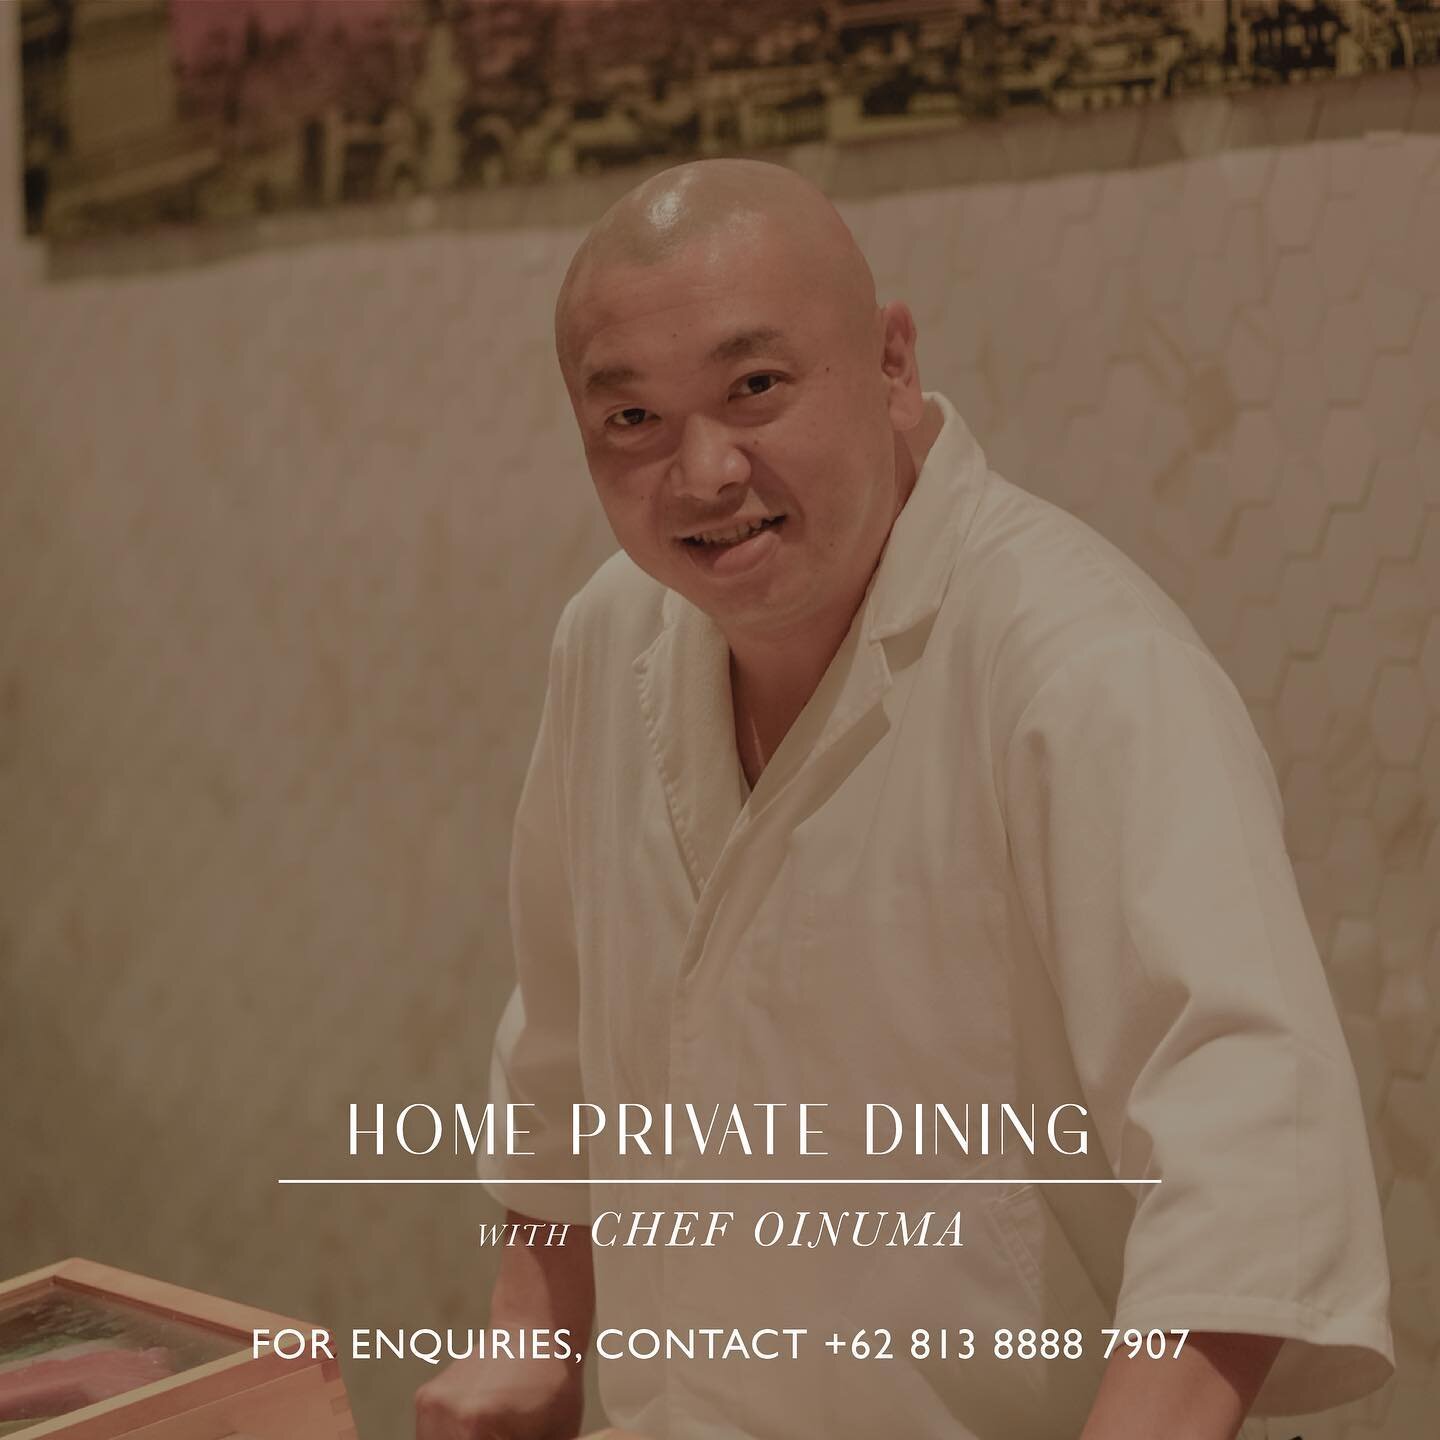 You can now book our Japanese Executive Chefs for Home Private Dining. For enquiries, please contact +62 813 8888 7907 or yawara.co.id/reservation.